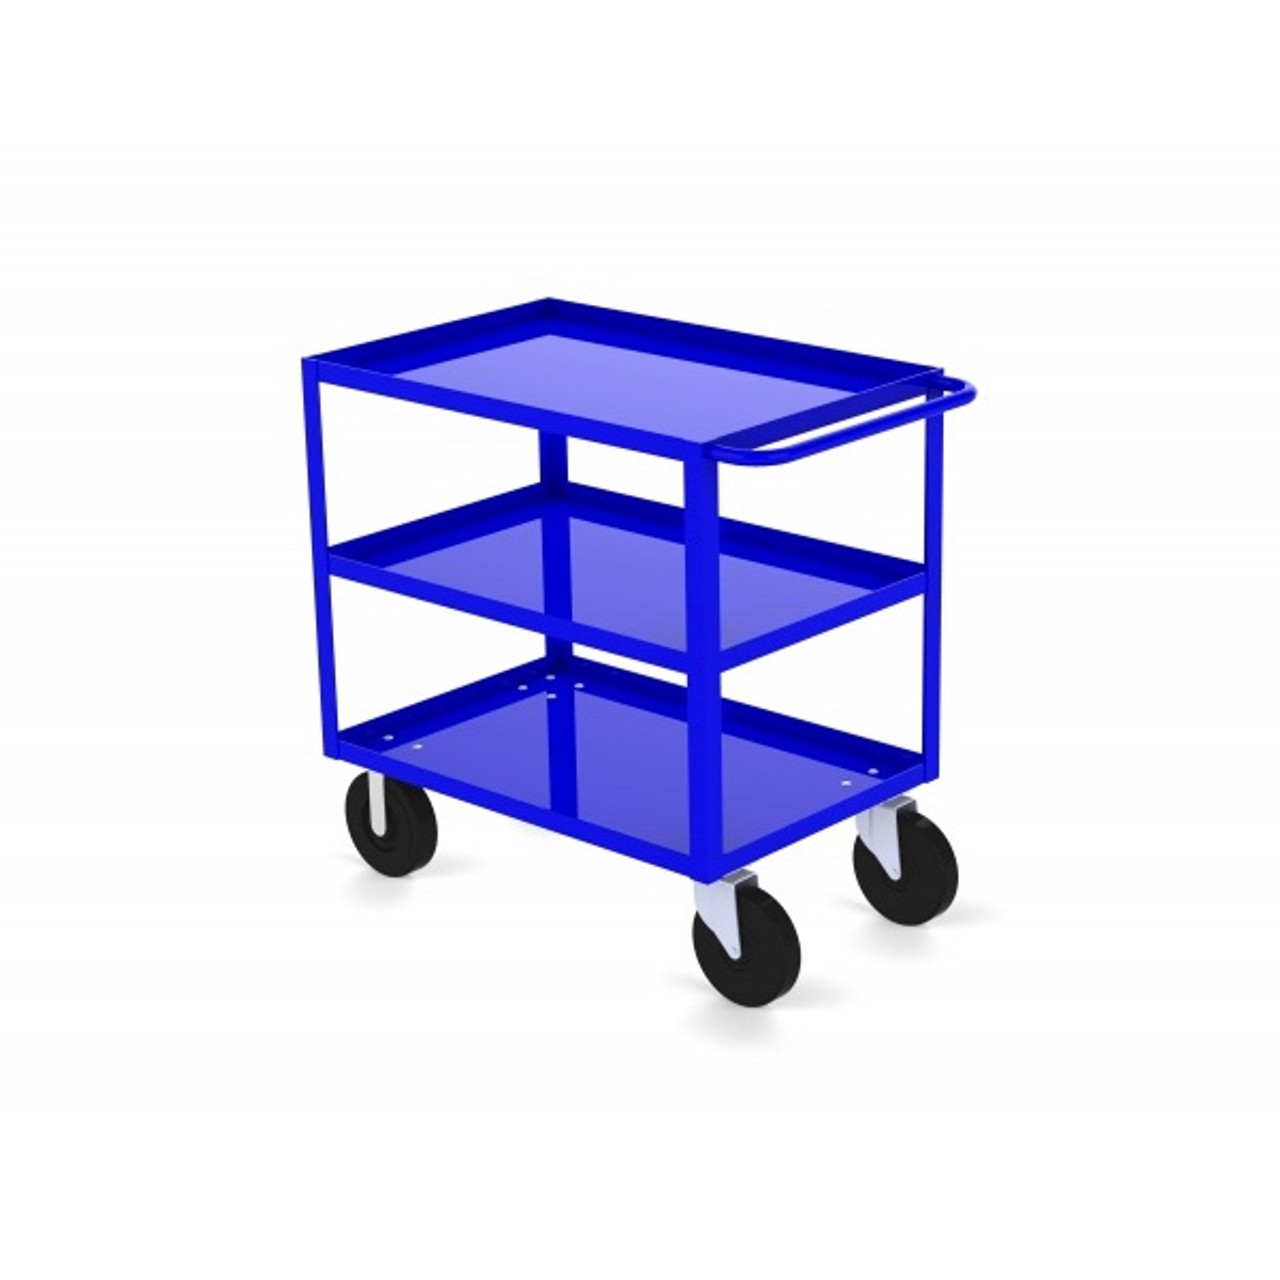 Valley Craft Three Shelf 24 x 36" Utility Cart, Blue with Mold On Casters  (CALL FOR BEST PRICING)